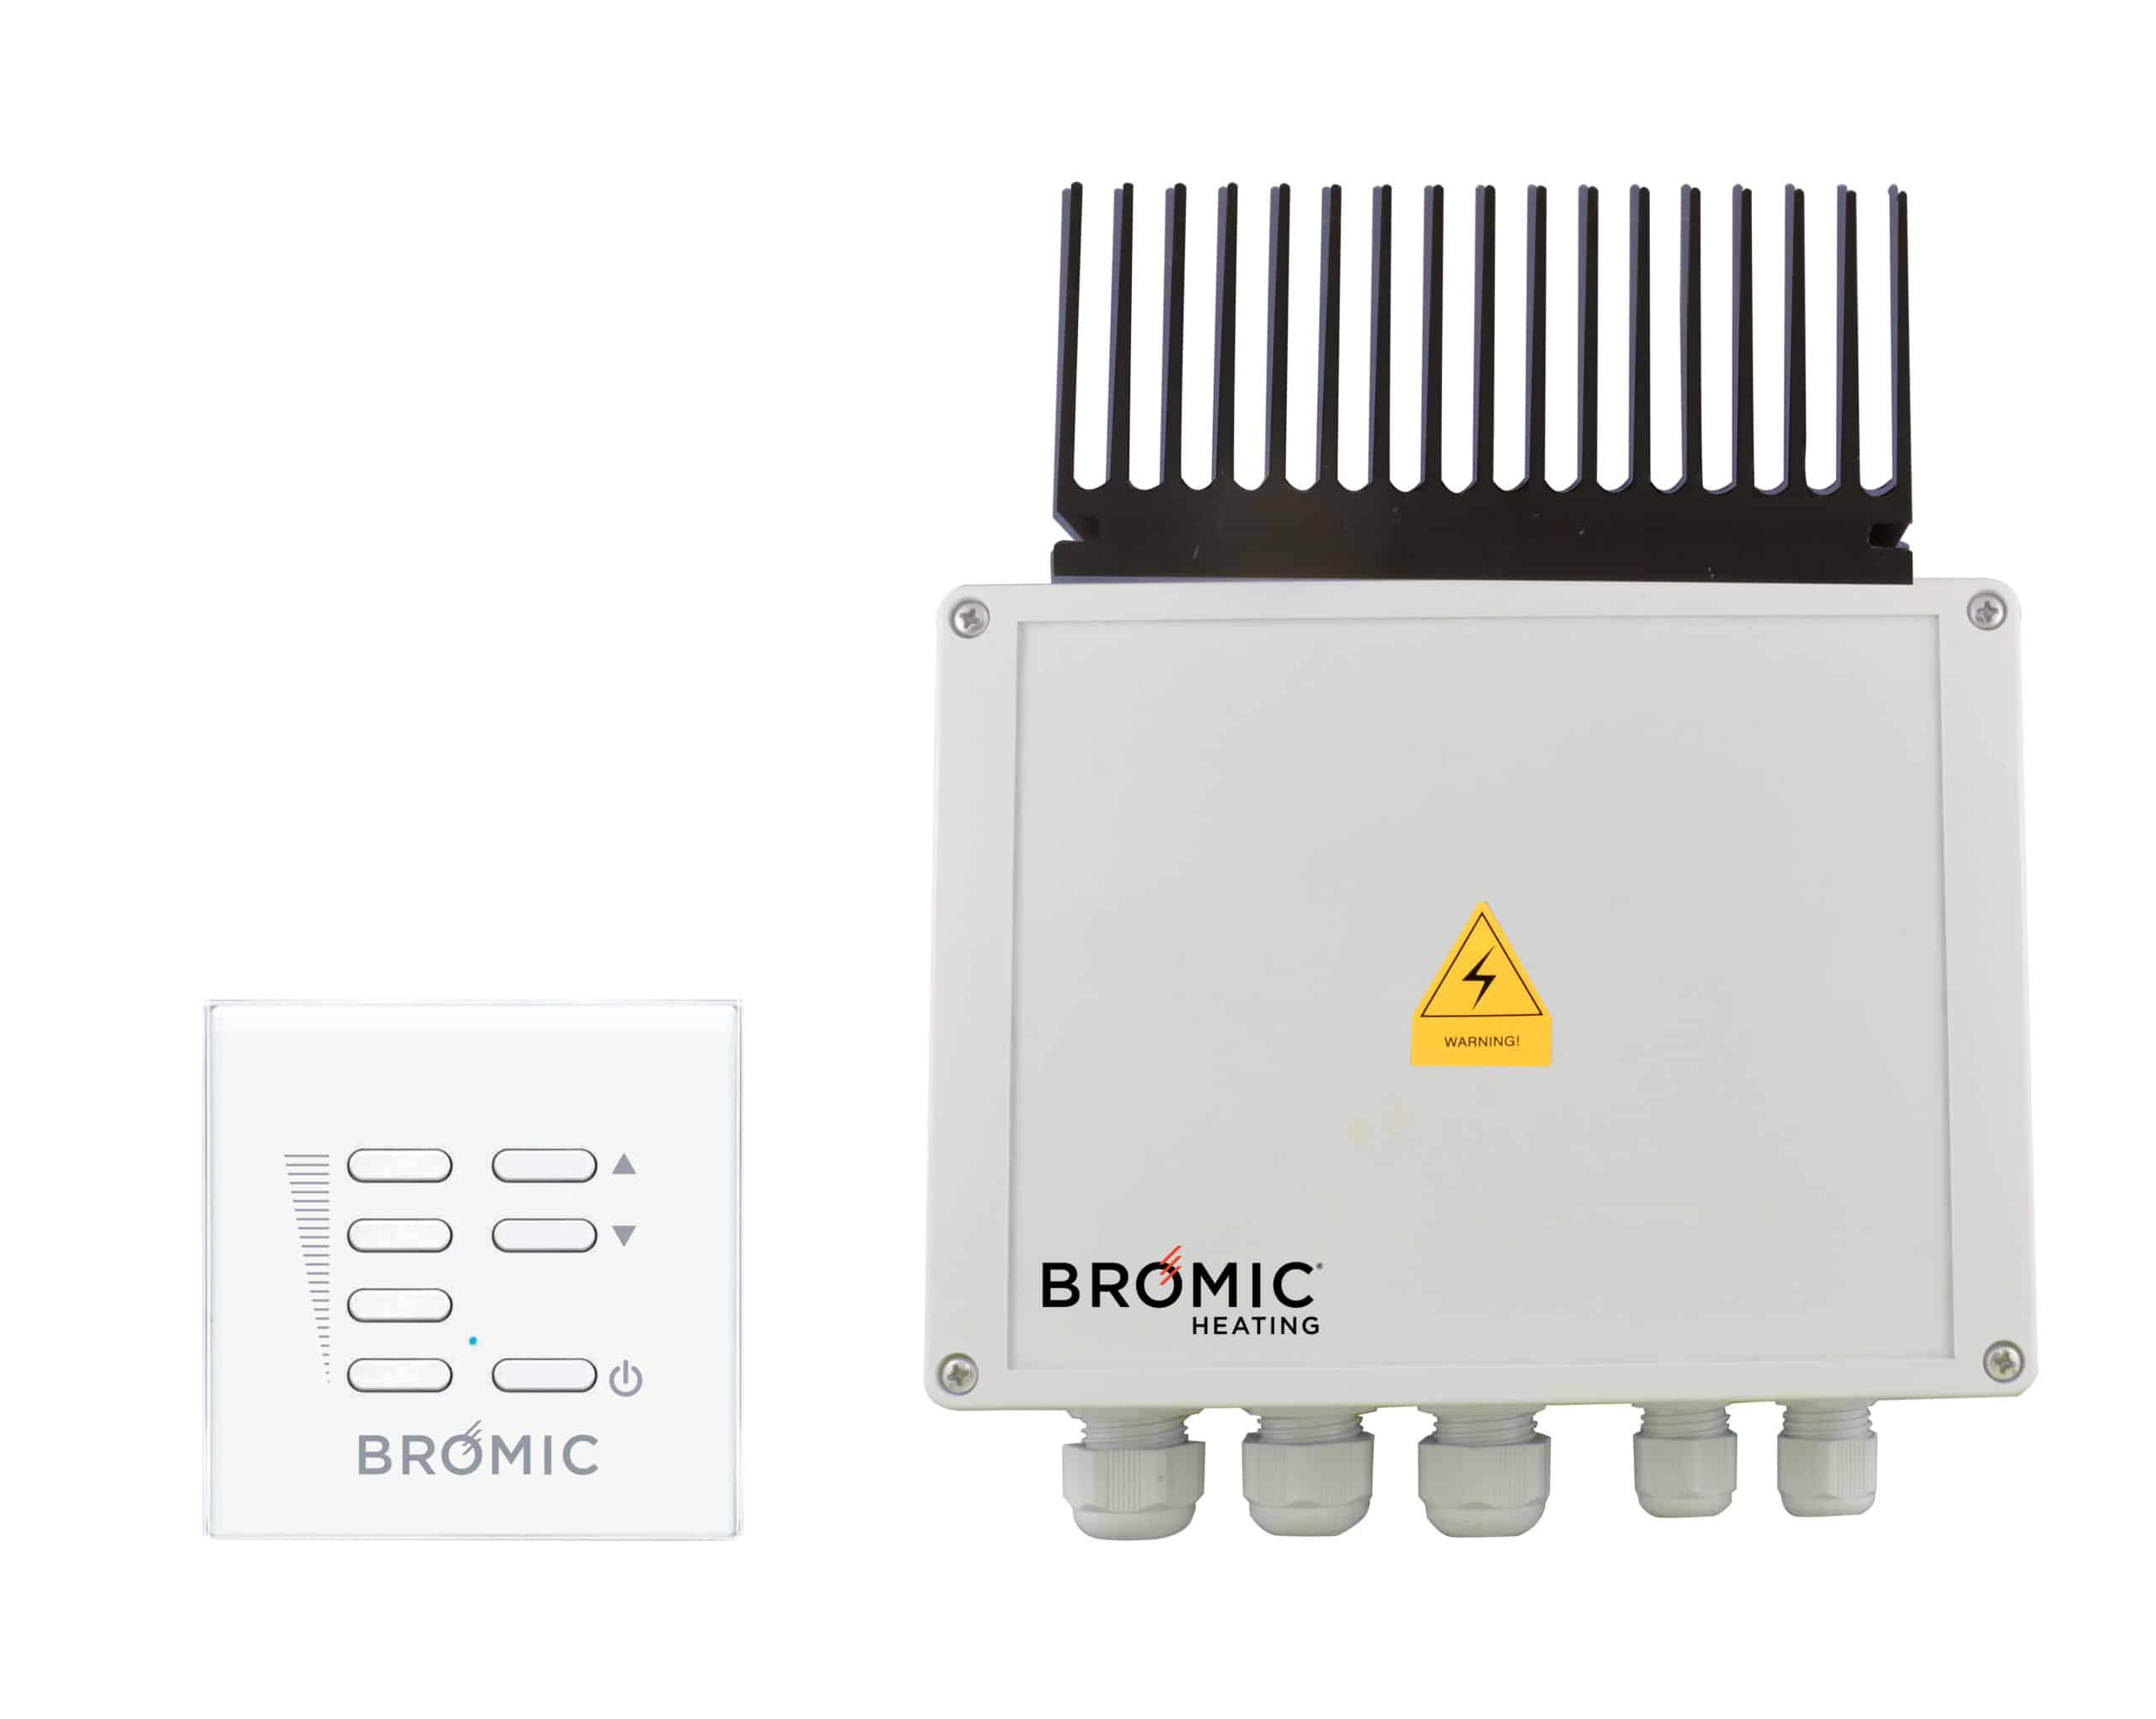 Bromic Electric Heater Dimmer Remote Control System